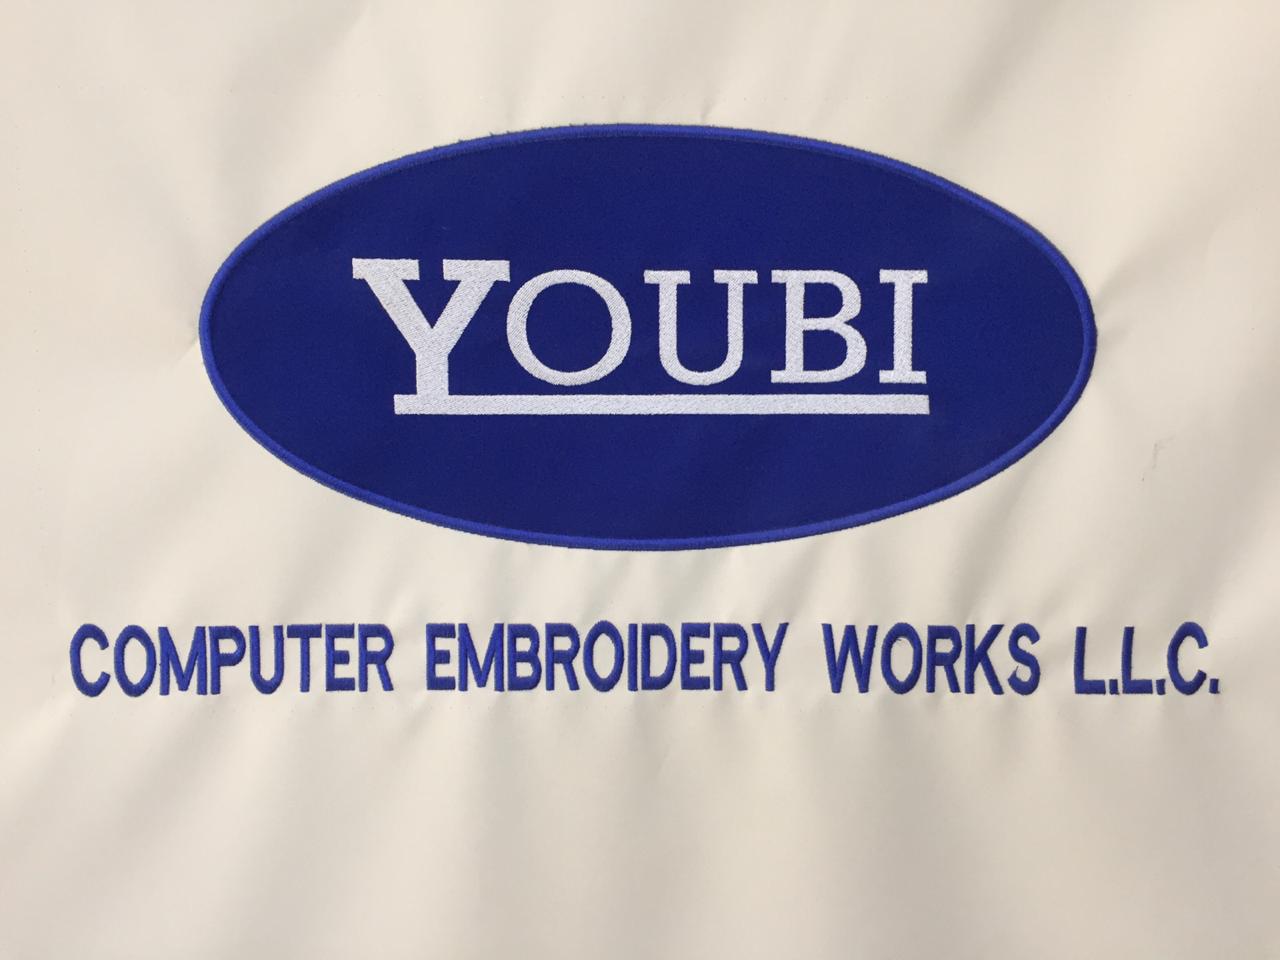 Youbi Computer Embroidery